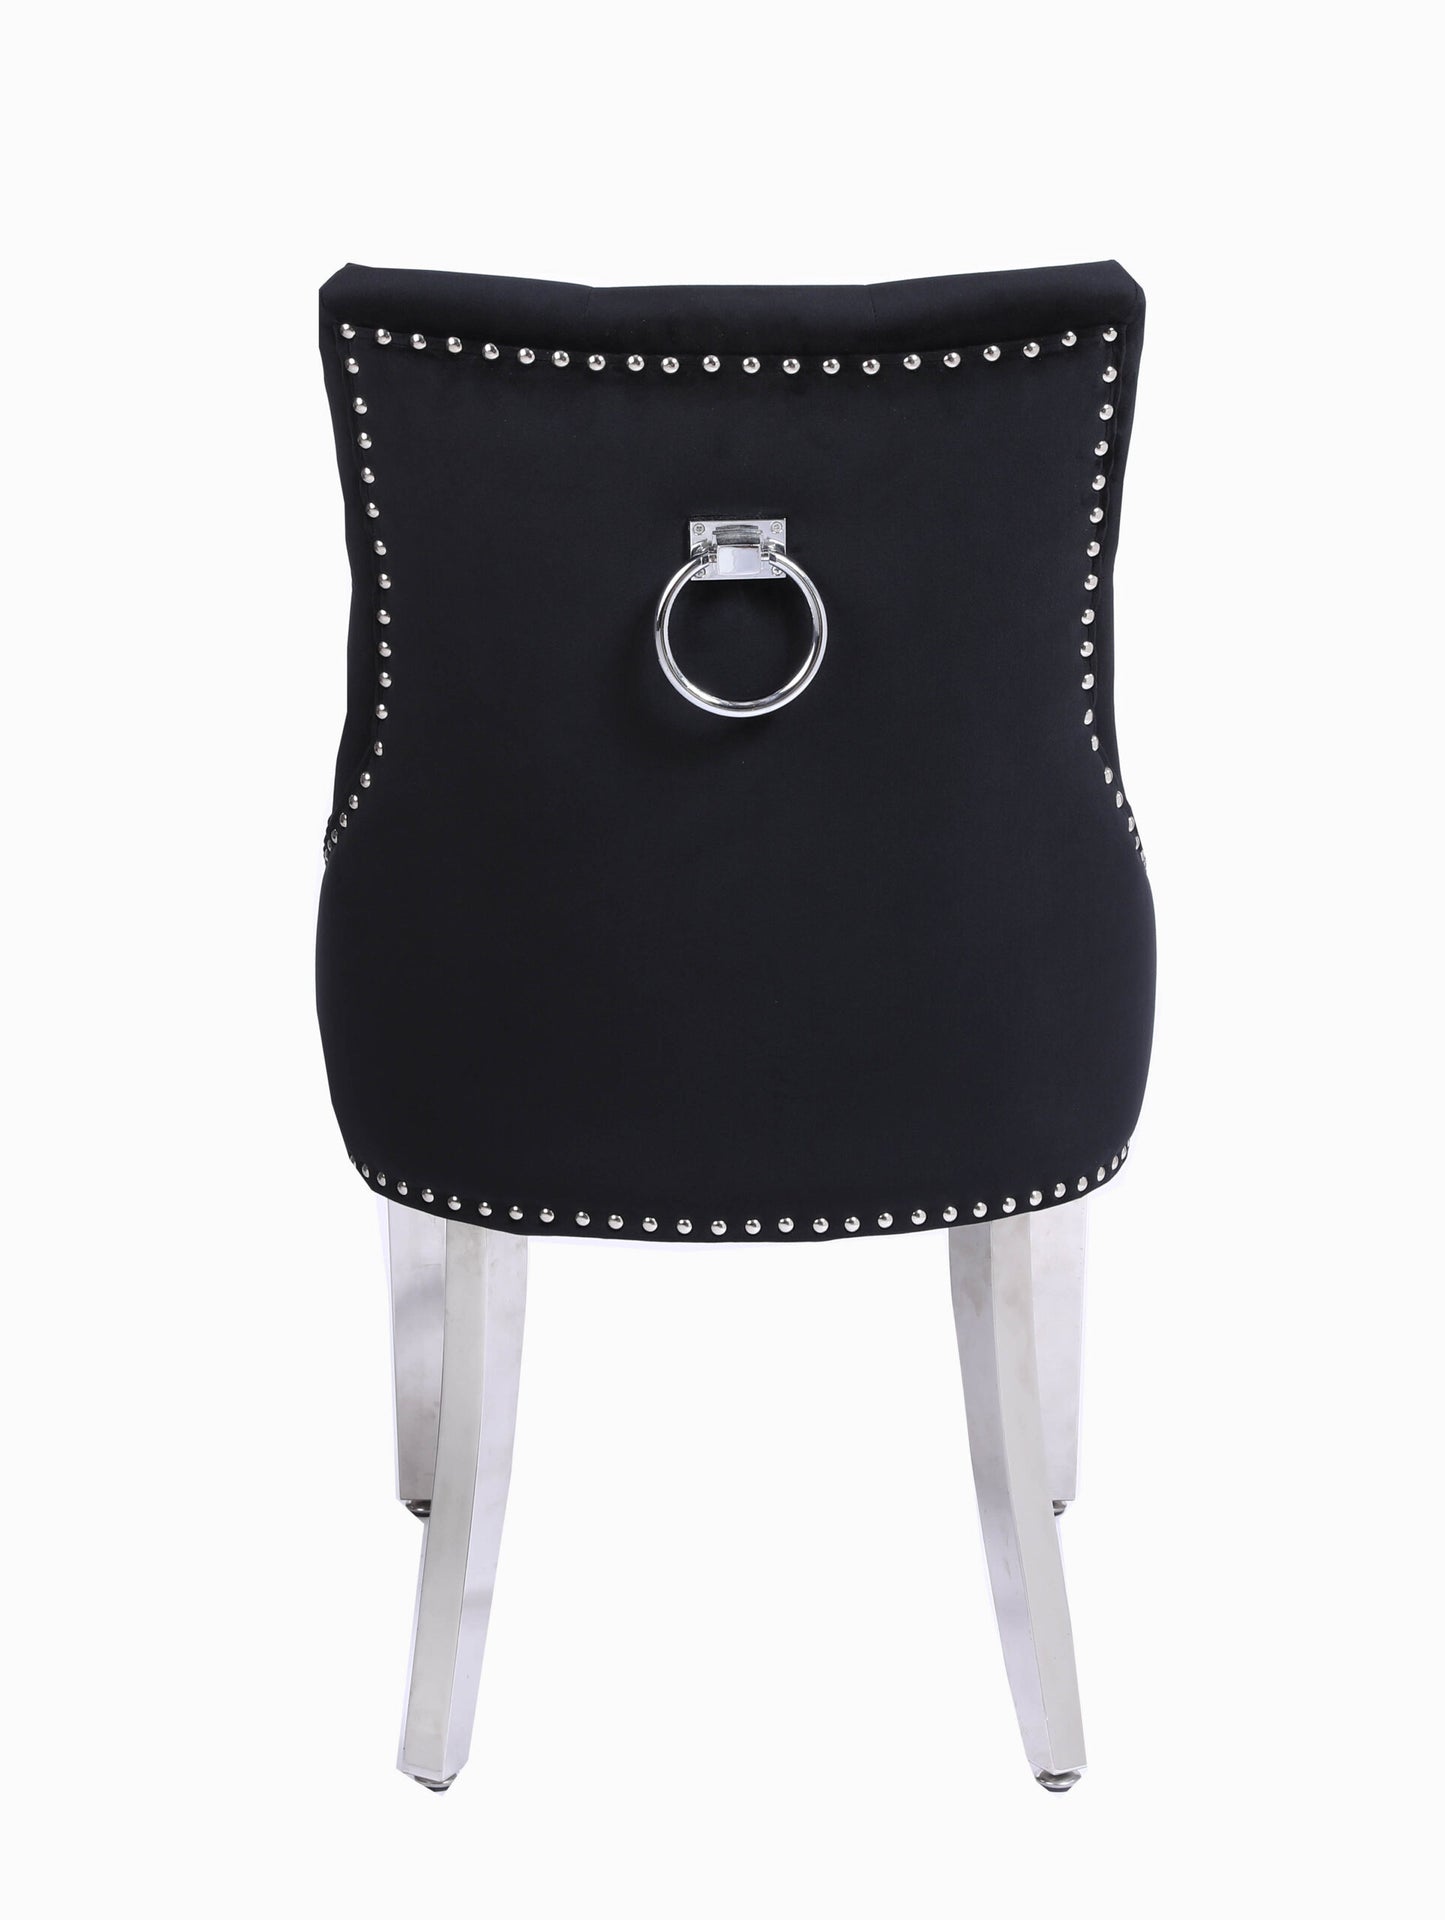 Valencia Velvet Dining Chair in Black Fabric Round Knocker Back with Chrome Polished Steel Legs (Set of 2 chairs)